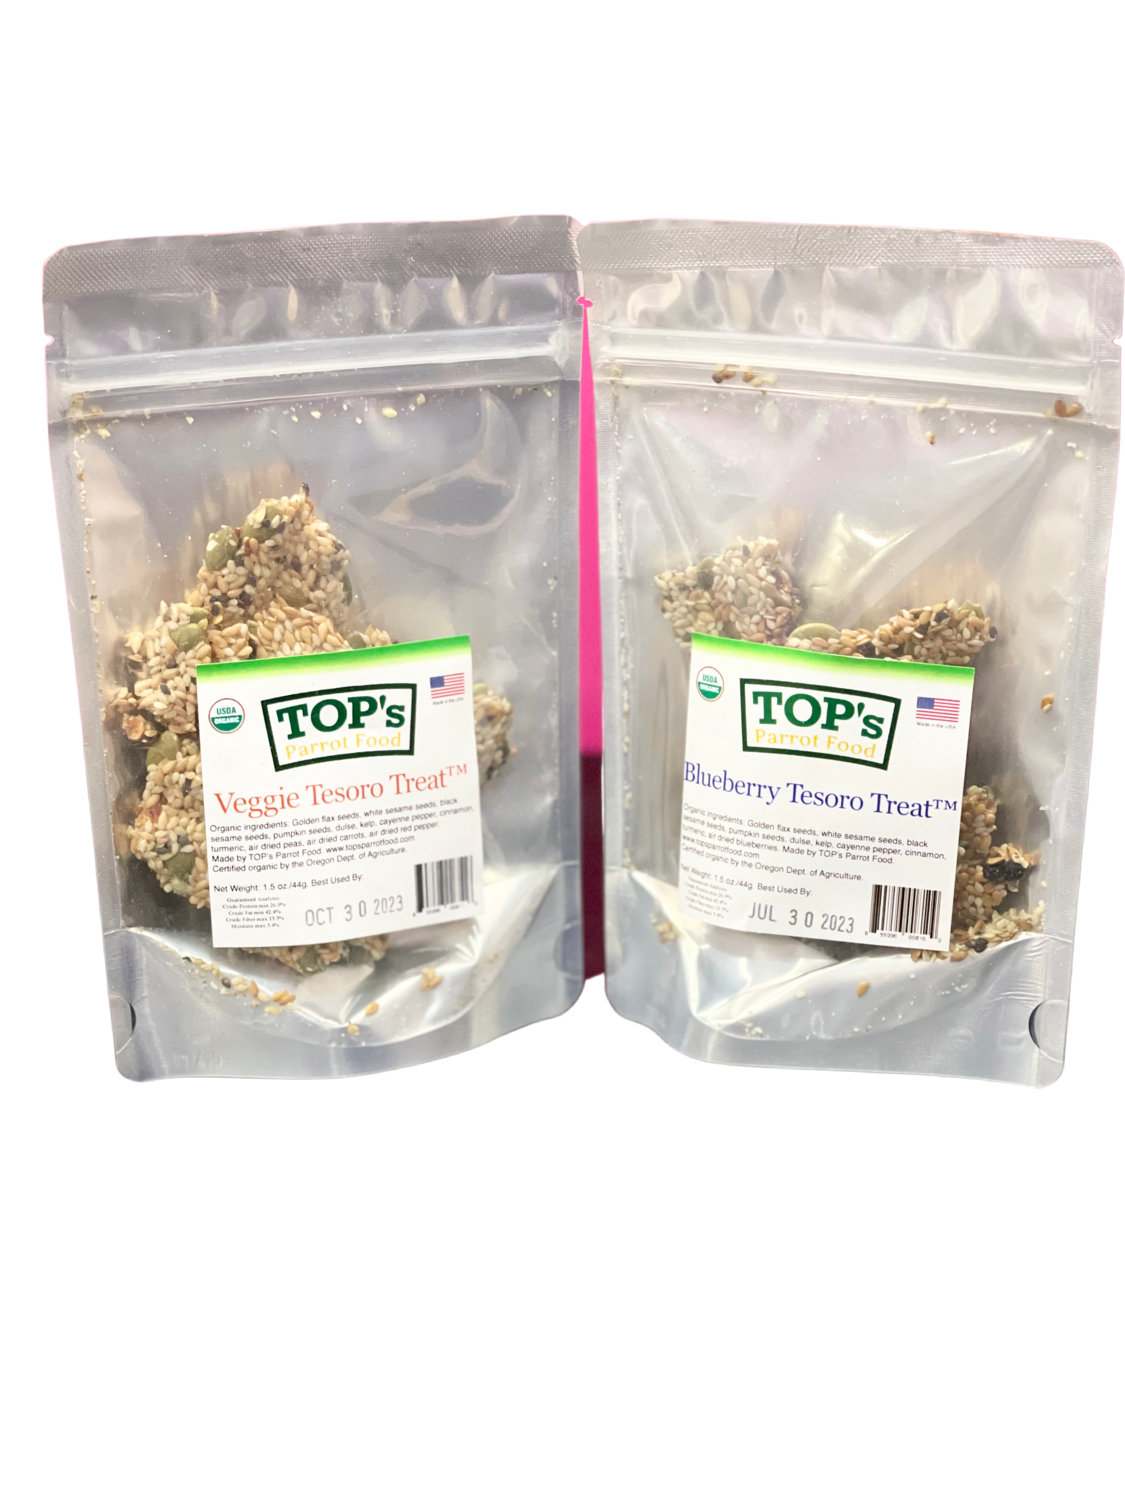 NEW! 2 Pack Tesoro Treats from TOPs Parrot Food (1 Blueberry, 1 Veggie)